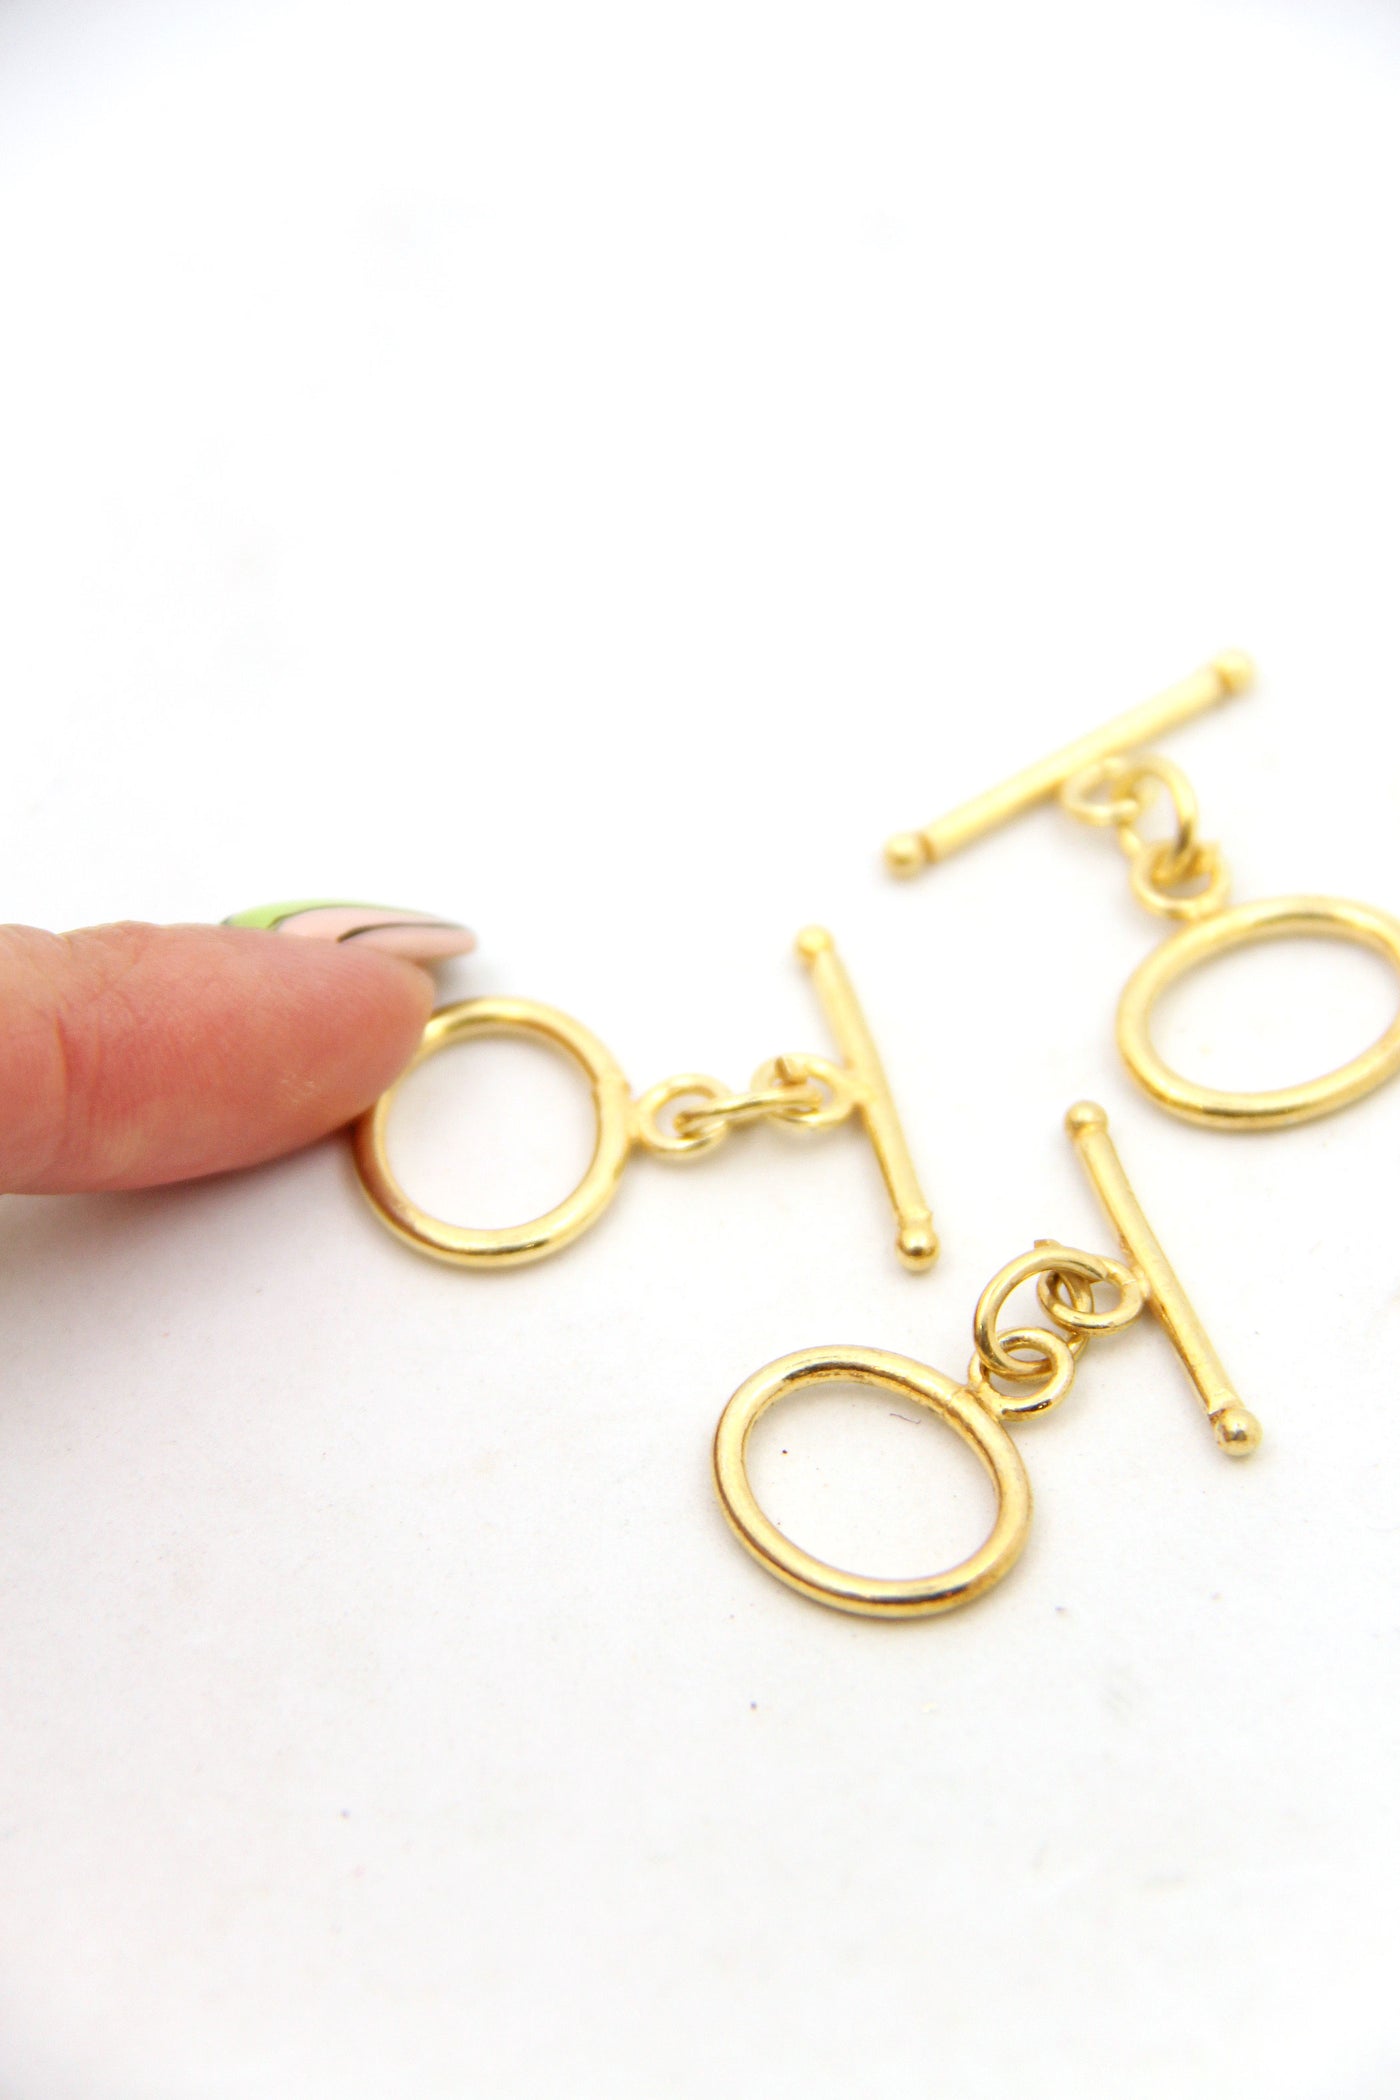 Gold Vermeil Oval Toggle Clasp, 25x18mm, Jewelry Findings